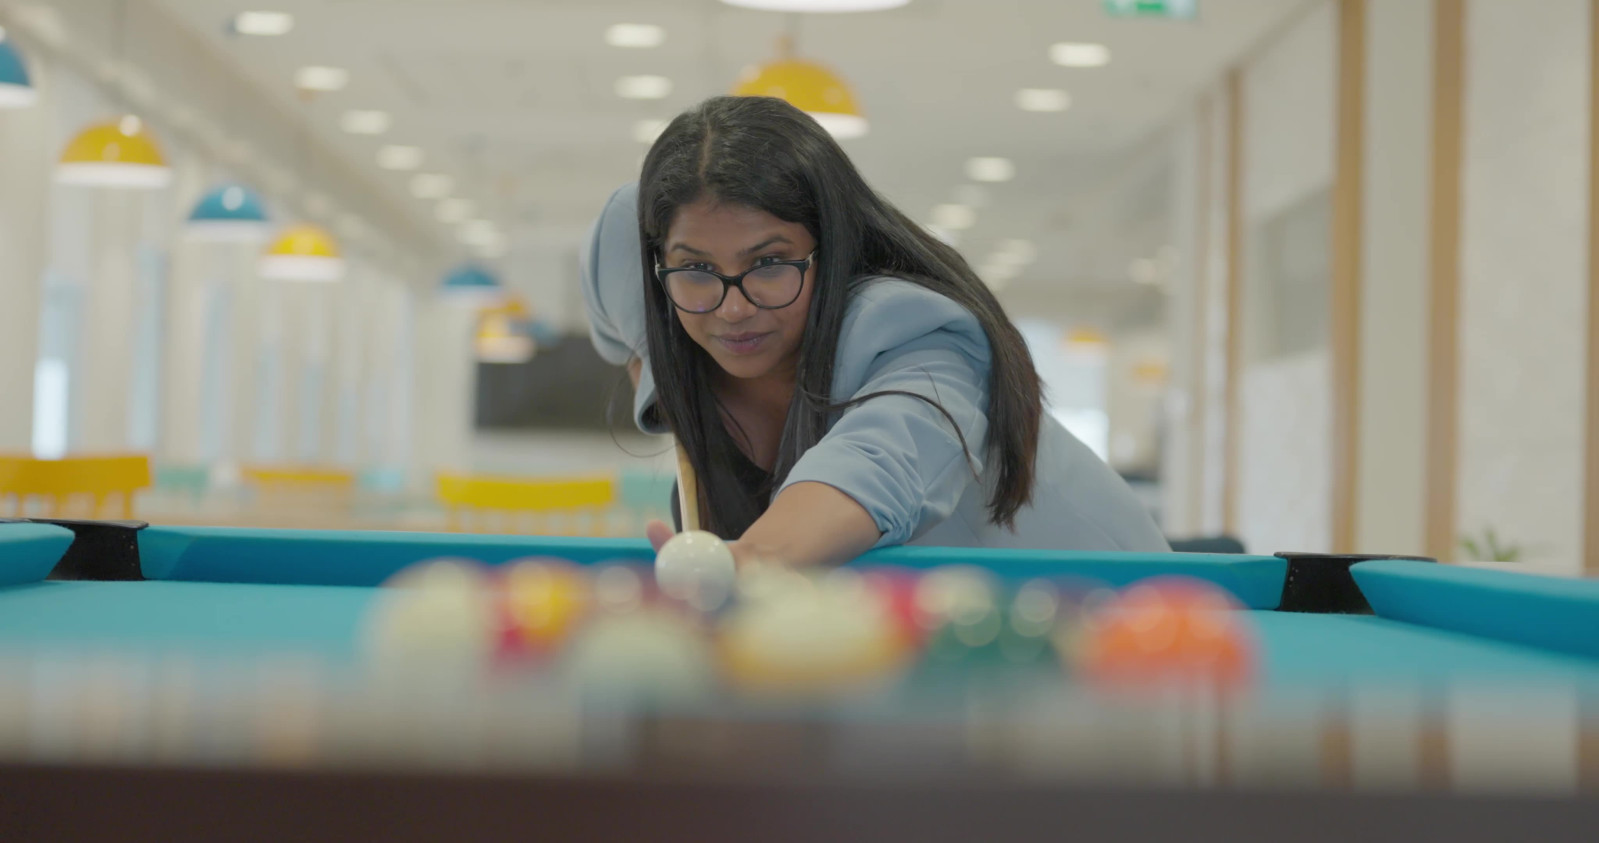 Still image of Informa employee playing pool from b-roll video footage for Life@Informa campaign as Employer brand page cover